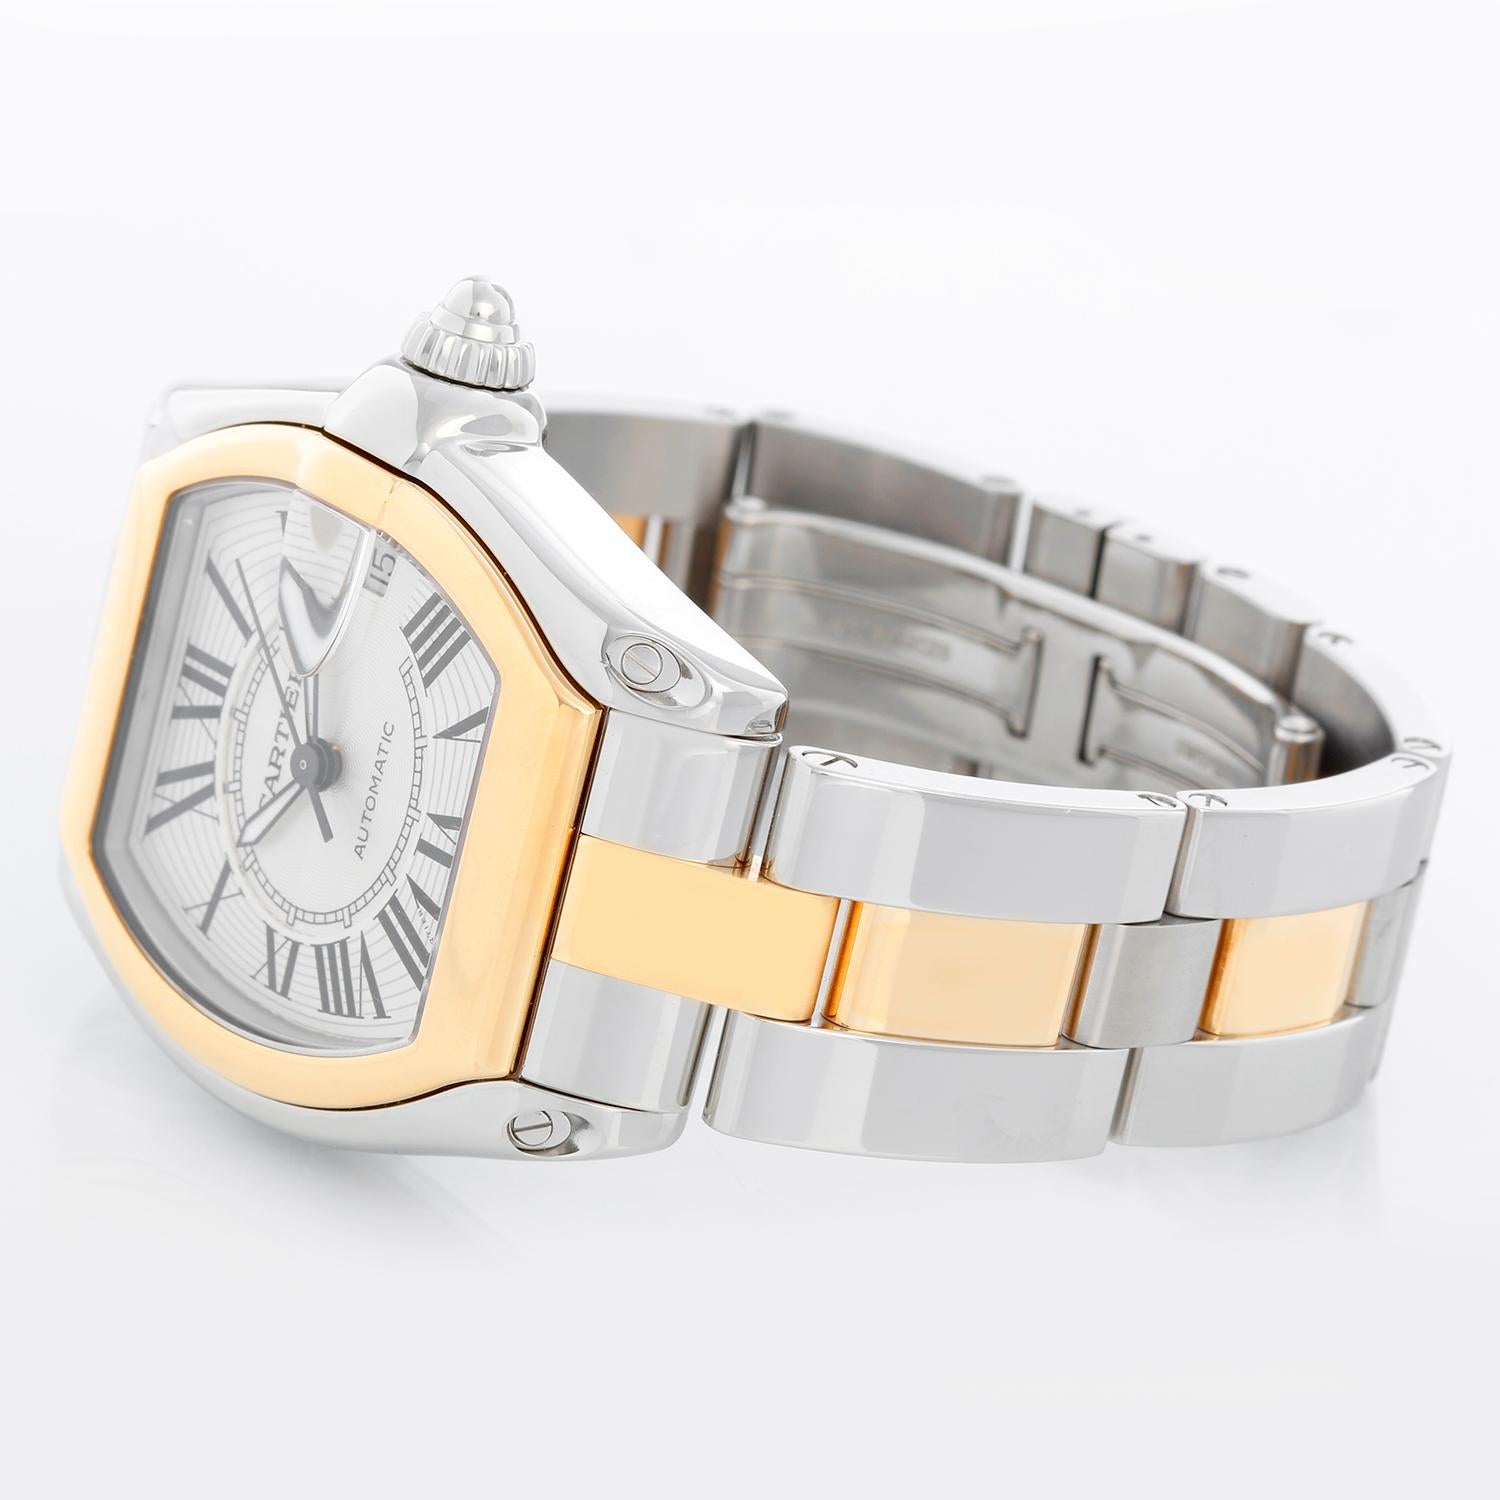 Cartier Roadster Men's Steel & Gold 2-Tone Watch W62031Y4 - Automatic winding. Stainless steel case with 18k yellow gold bezel. Silver dial with black Roman numerals; date at 3 o'clock. Stainless steel and 18k yellow gold Cartier Roadster bracelet